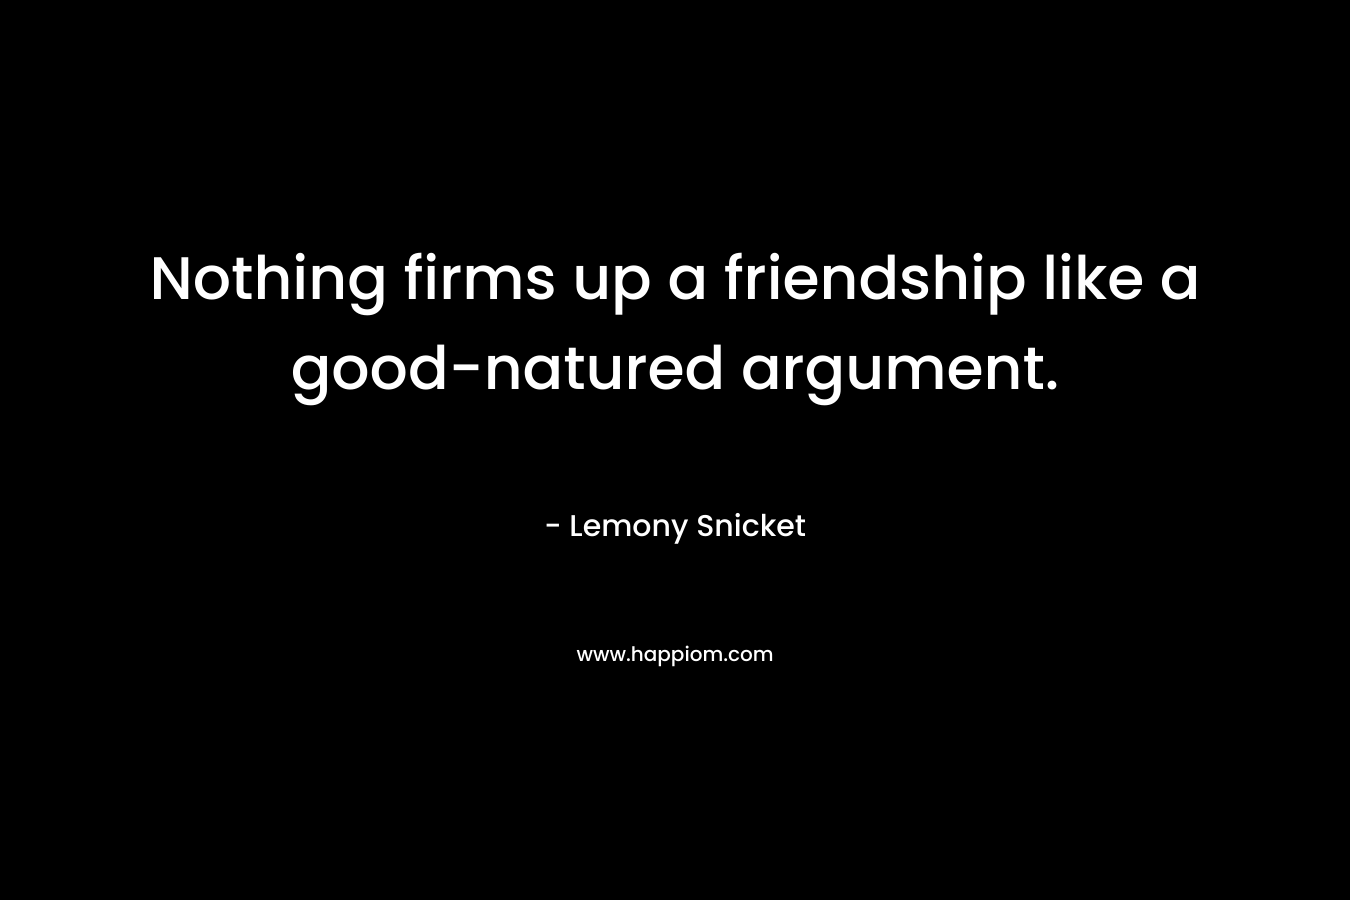 Nothing firms up a friendship like a good-natured argument.